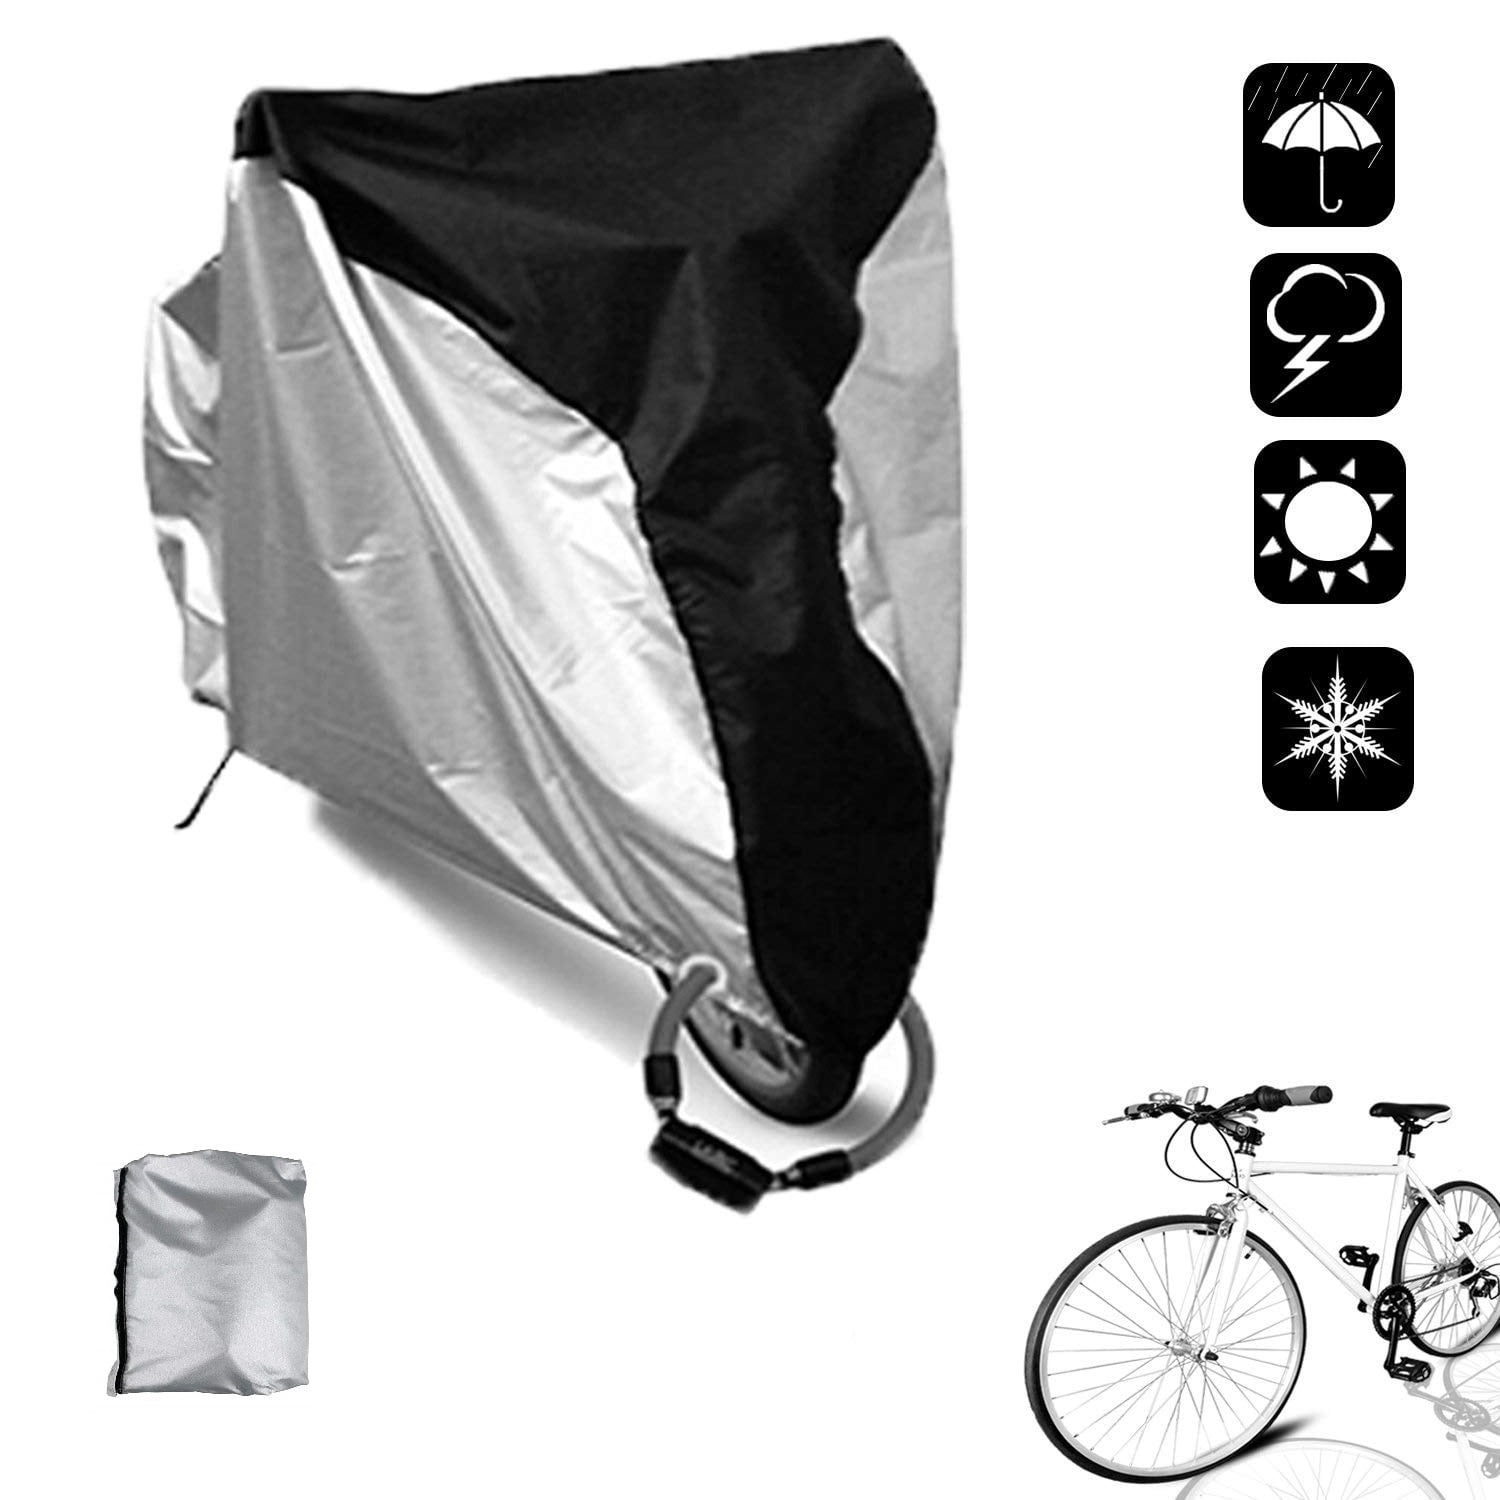 Washable Fit Most Bicycle Sizes and Bike Racks Adapts to Hitch Racks & Car Bike Racks THE BICYCLE HOUSE Premium Bike Cover for Indoor Storage and Outdoor Transportation Stretchy Scratch-Proof